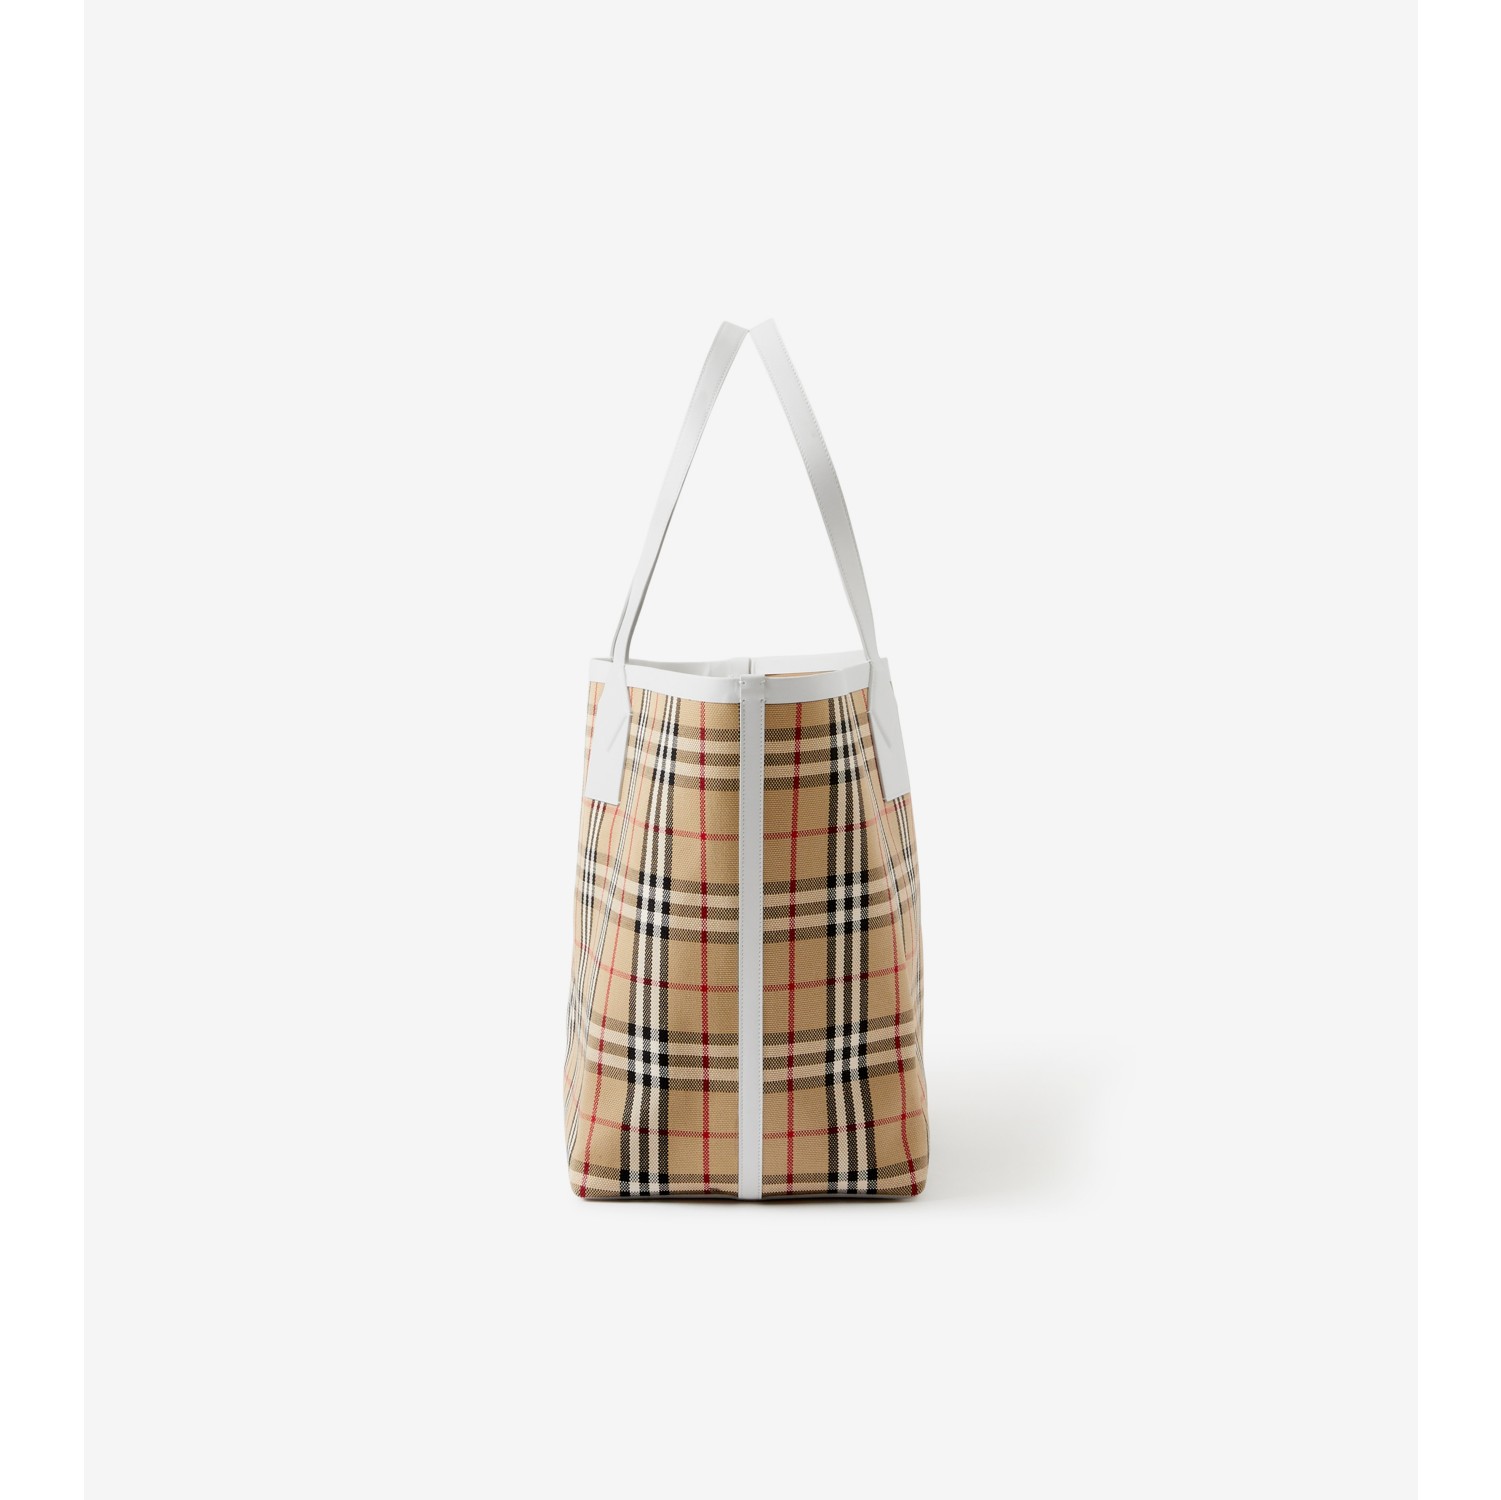 Large London Tote Bag in Beige - Women | Burberry® Official